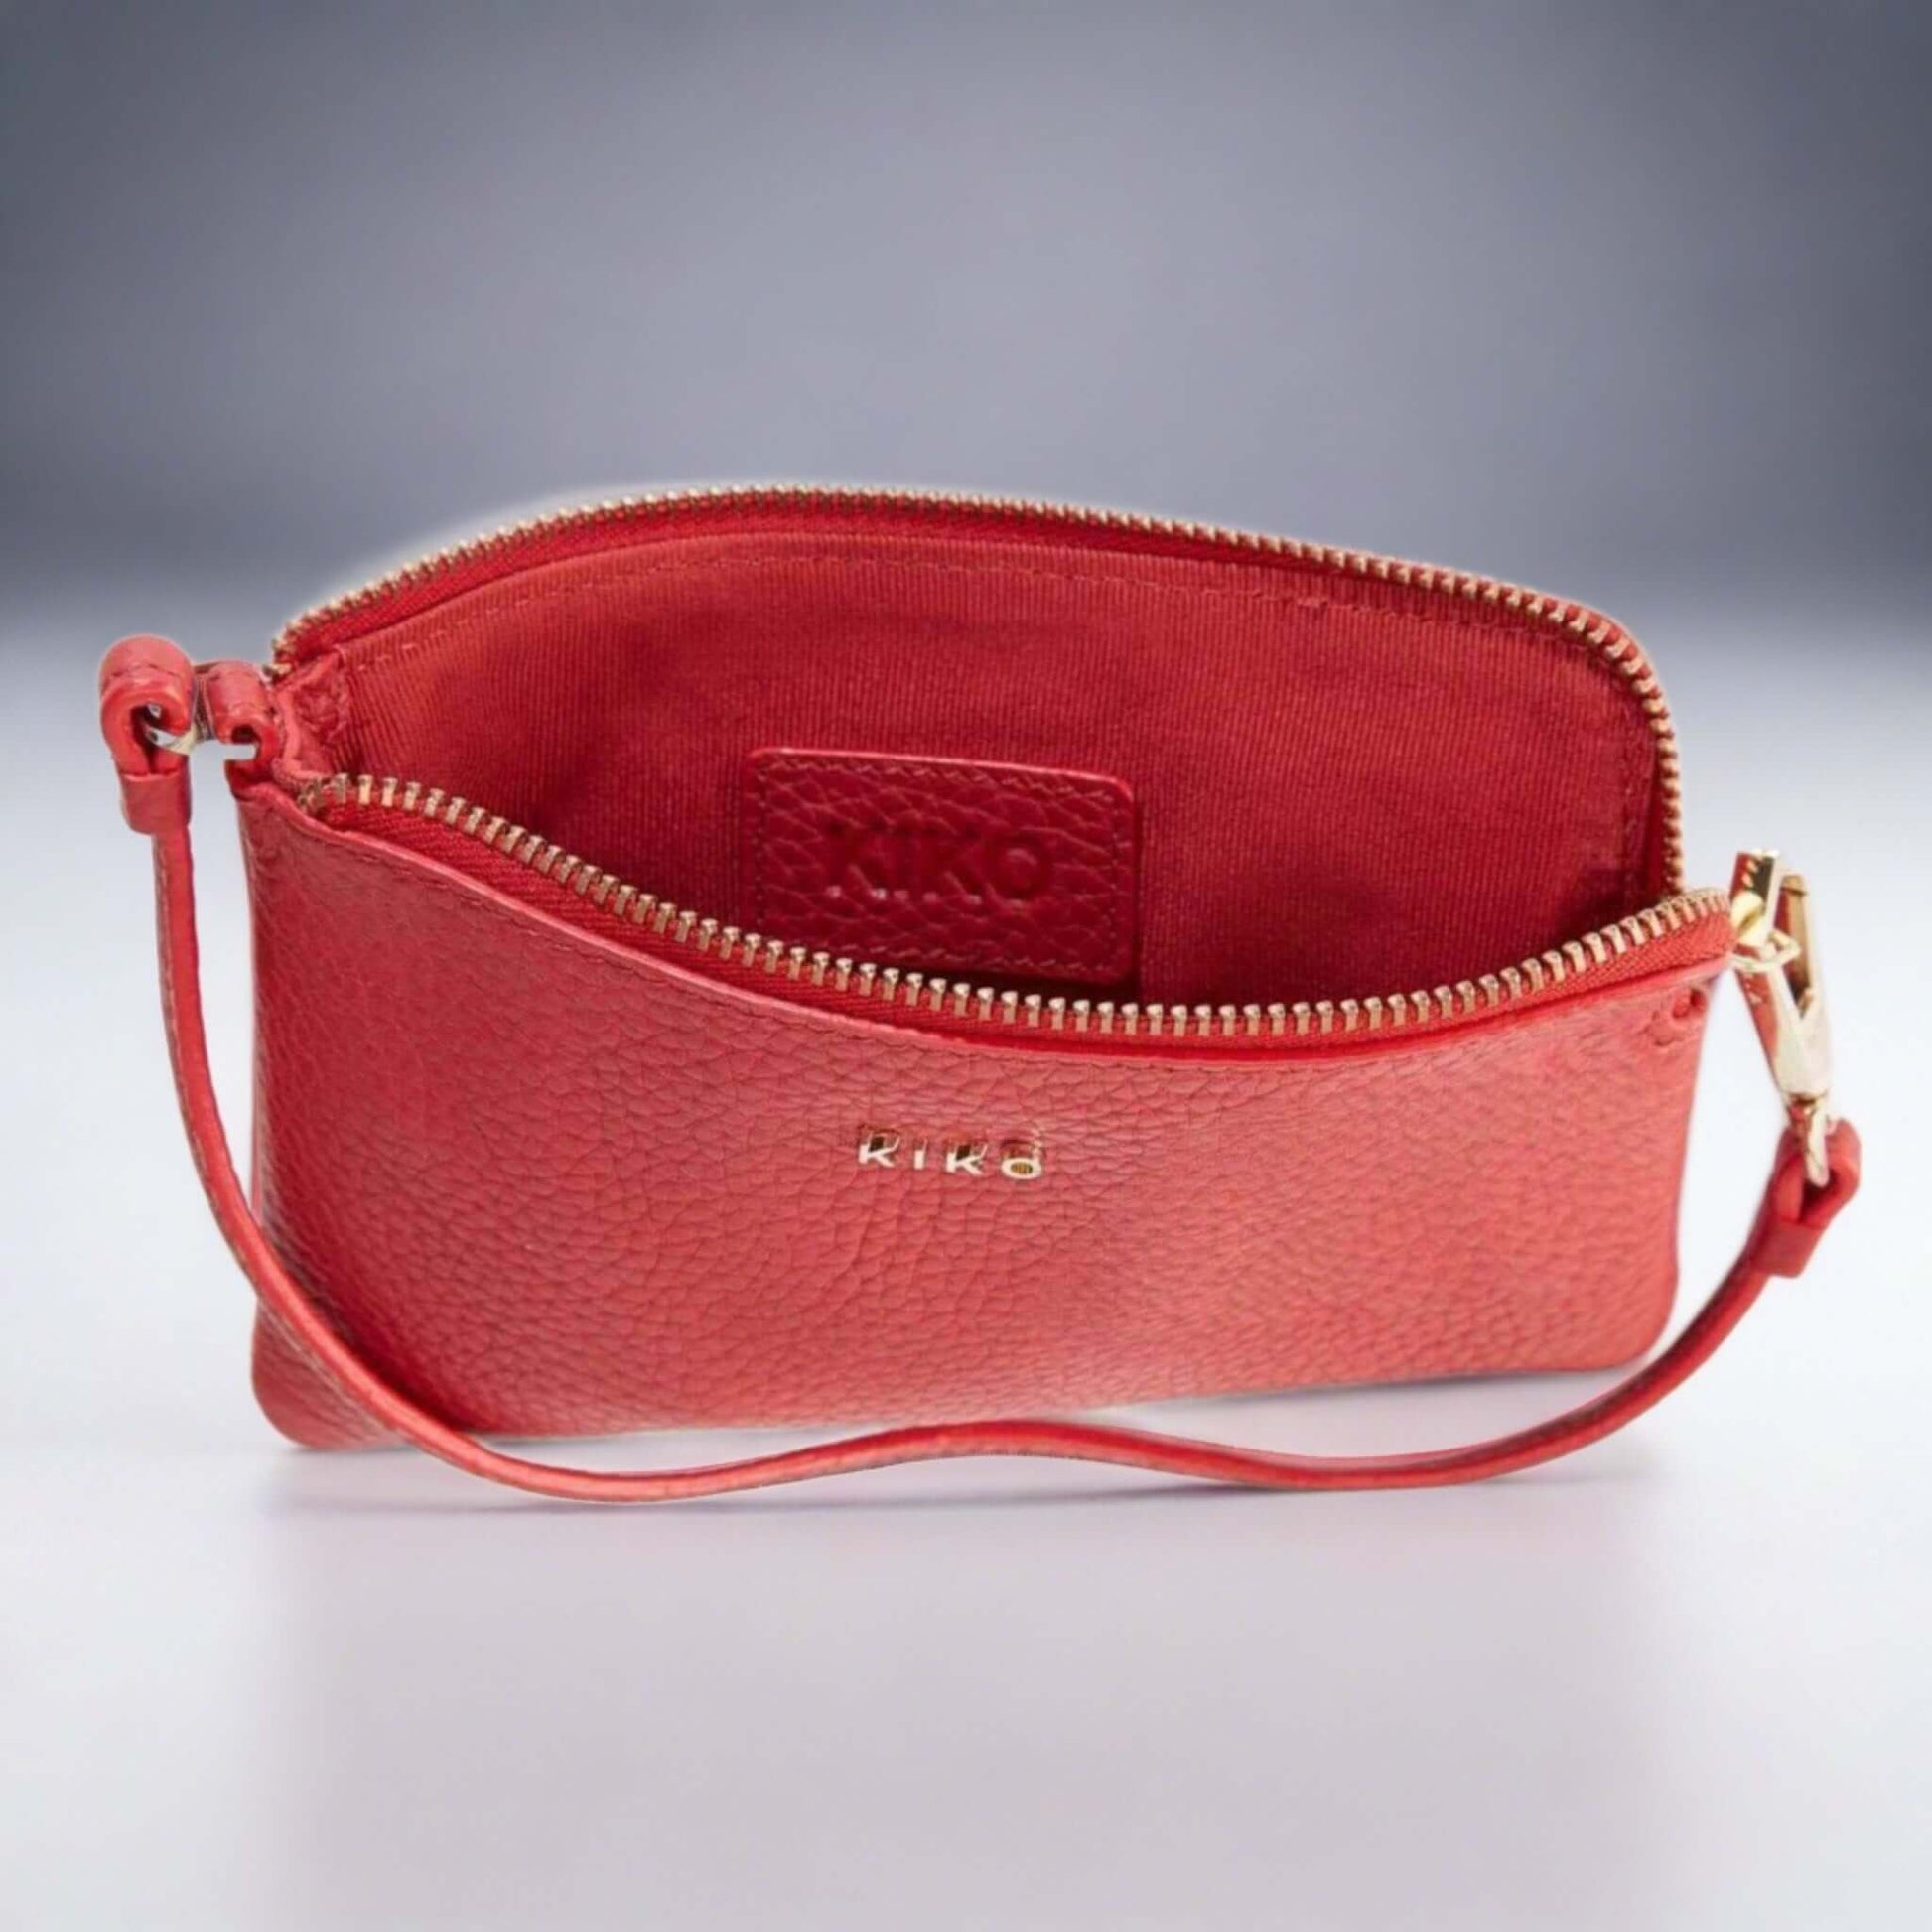 Compact red leather wristlet with zip compartments and gold-tone hardware.